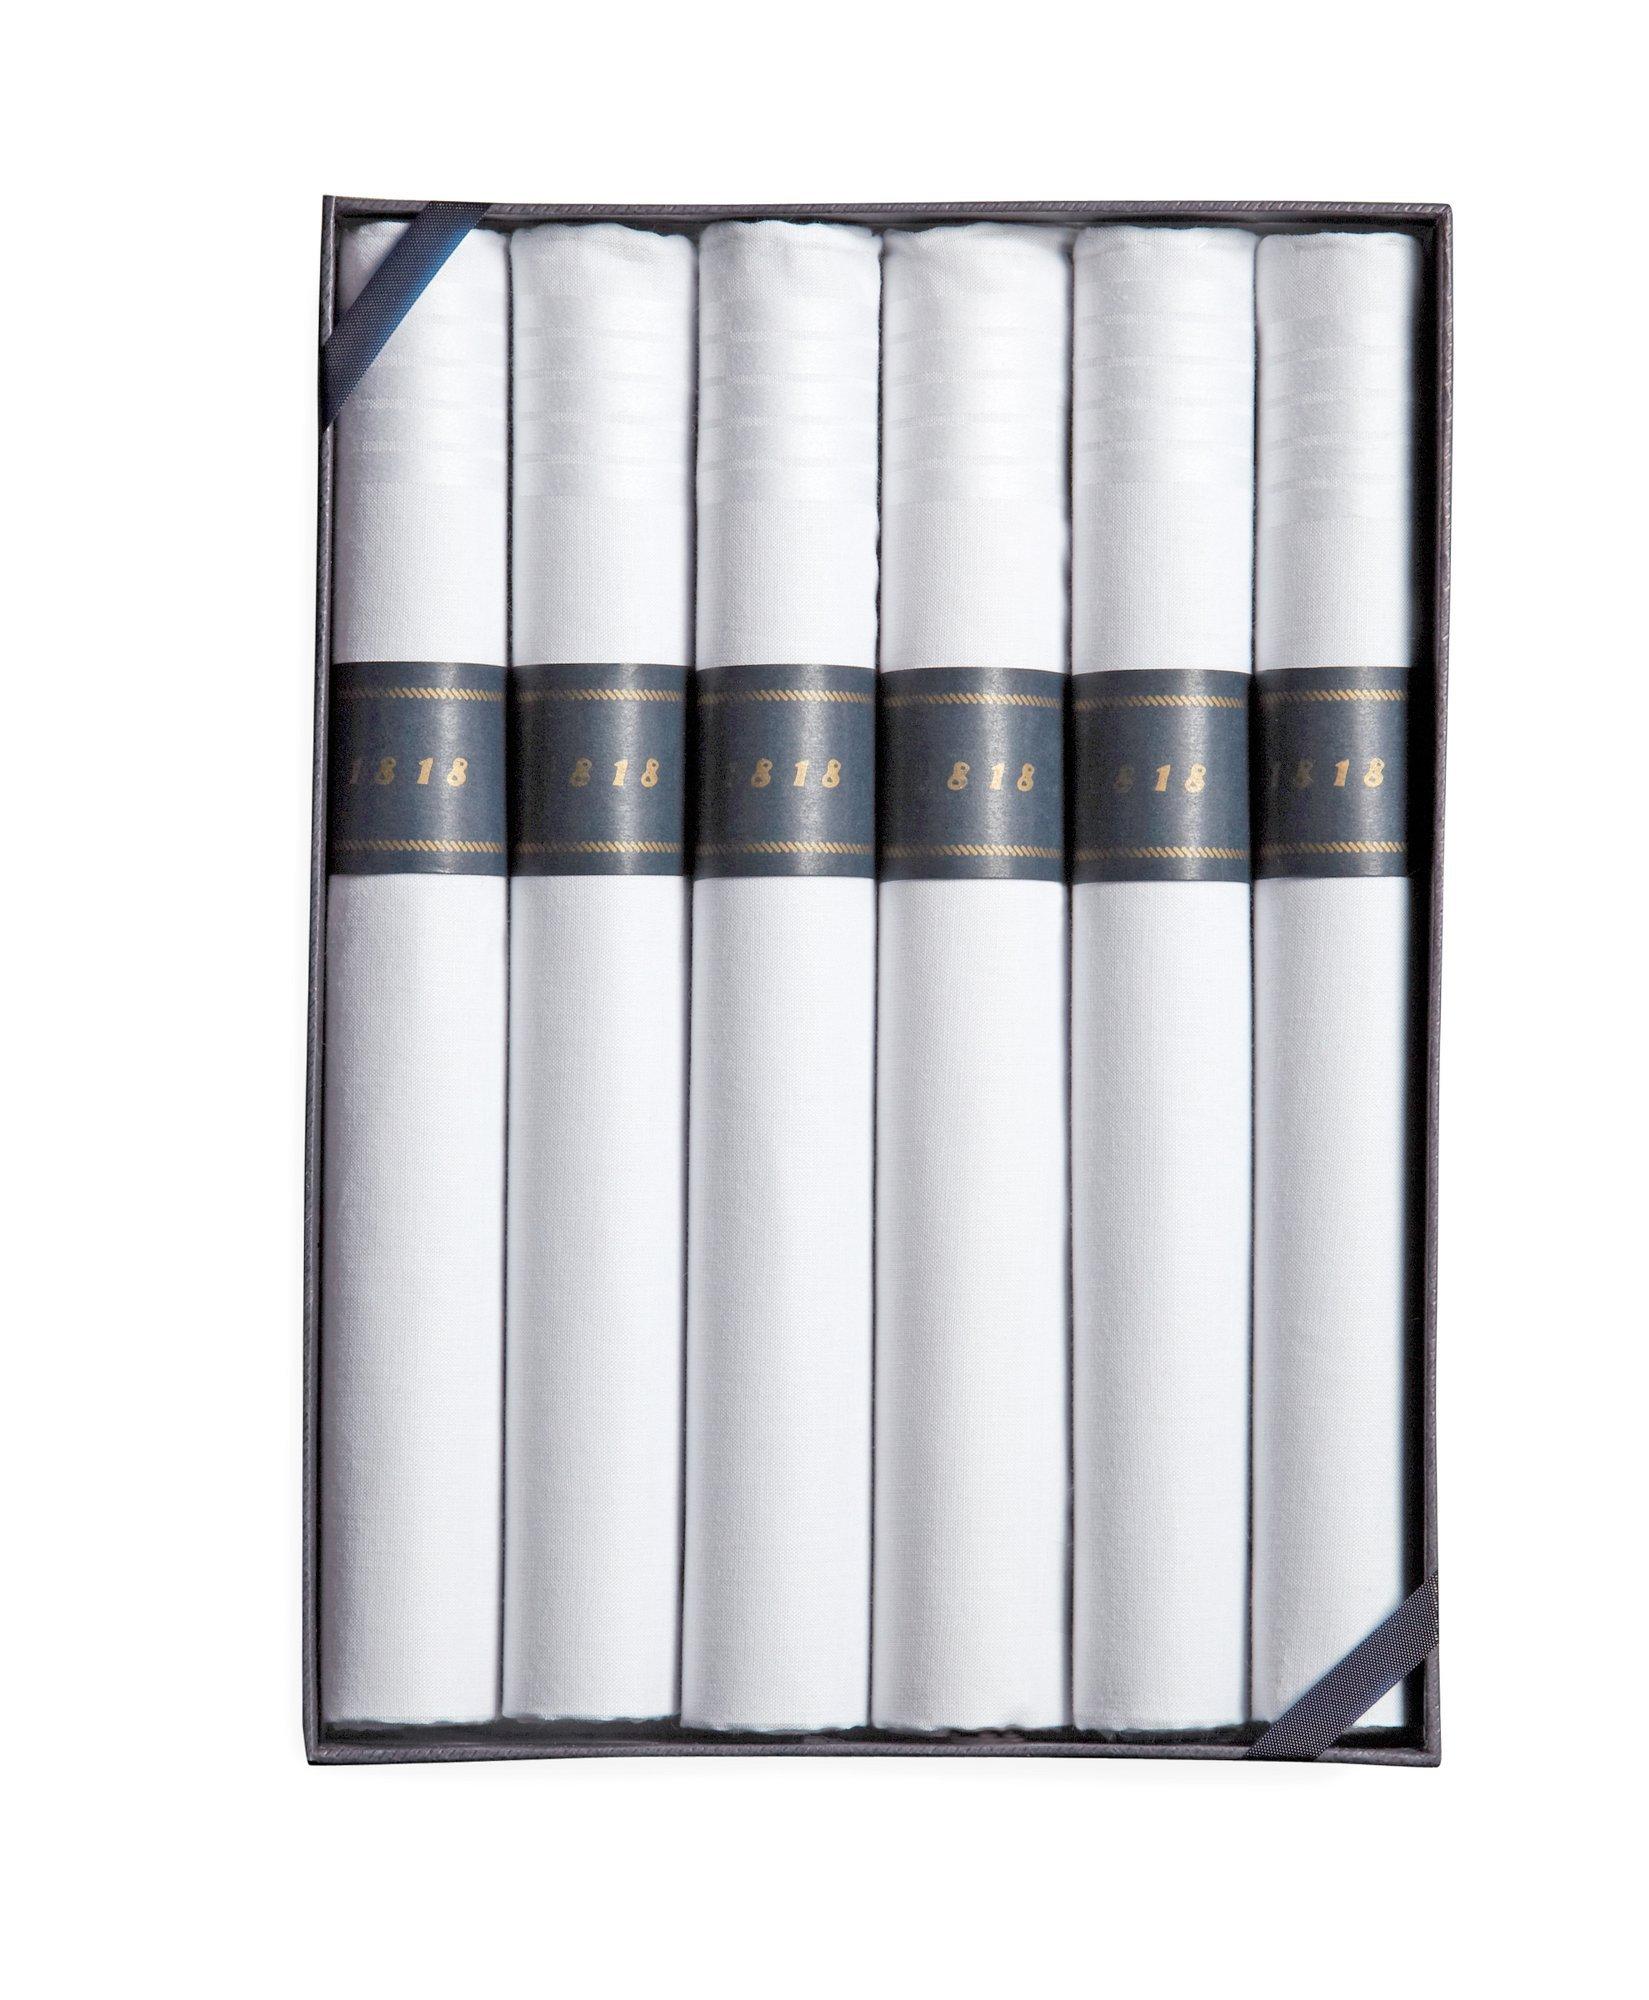 Brooks Brothers Cigar-rolled Handkerchiefs-set Of 6 | White